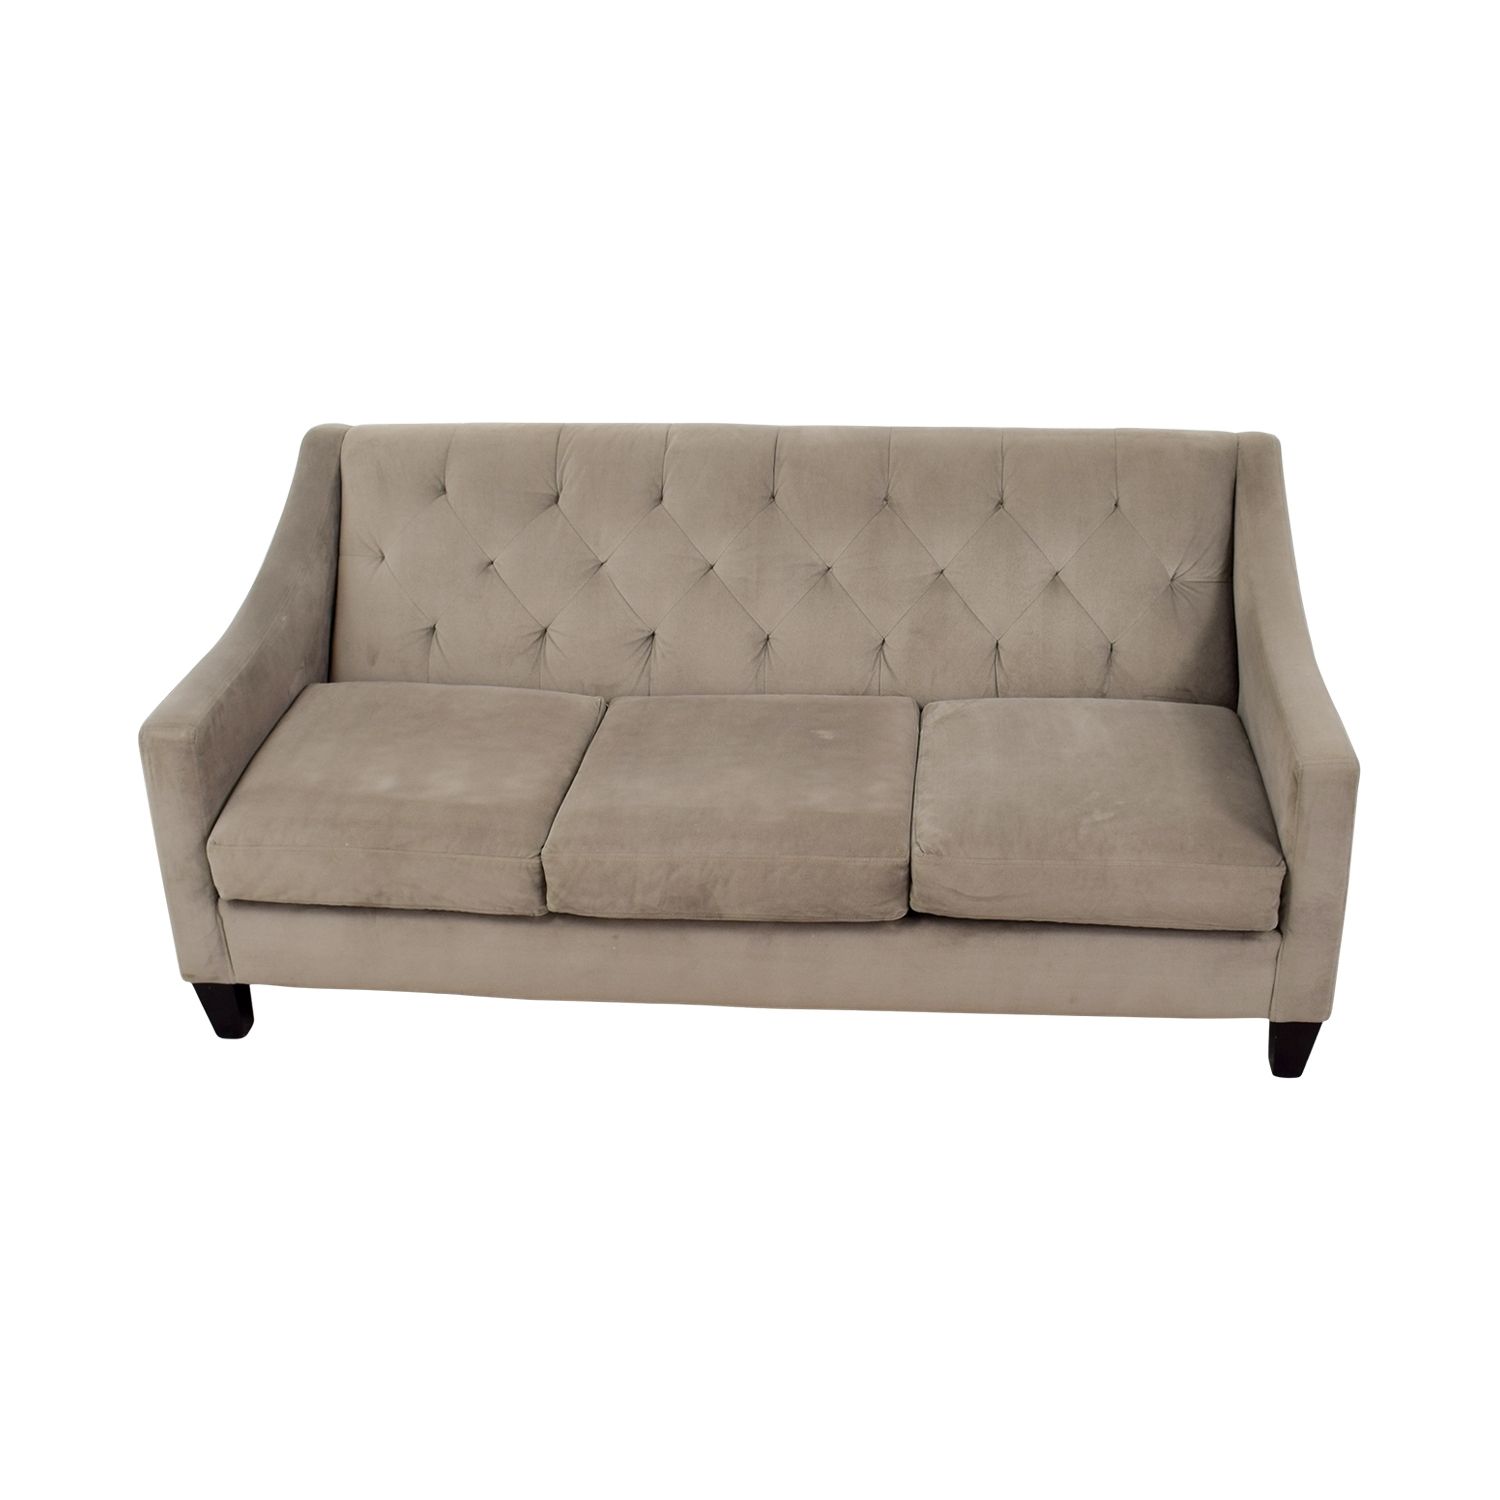 [%82% Off – Macy's Macy's Gray Microfiber Tufted Three Cushion Couch For Best And Newest Macys Sofas|macys Sofas Inside Trendy 82% Off – Macy's Macy's Gray Microfiber Tufted Three Cushion Couch|latest Macys Sofas For 82% Off – Macy's Macy's Gray Microfiber Tufted Three Cushion Couch|preferred 82% Off – Macy's Macy's Gray Microfiber Tufted Three Cushion Couch Within Macys Sofas%] (View 9 of 15)